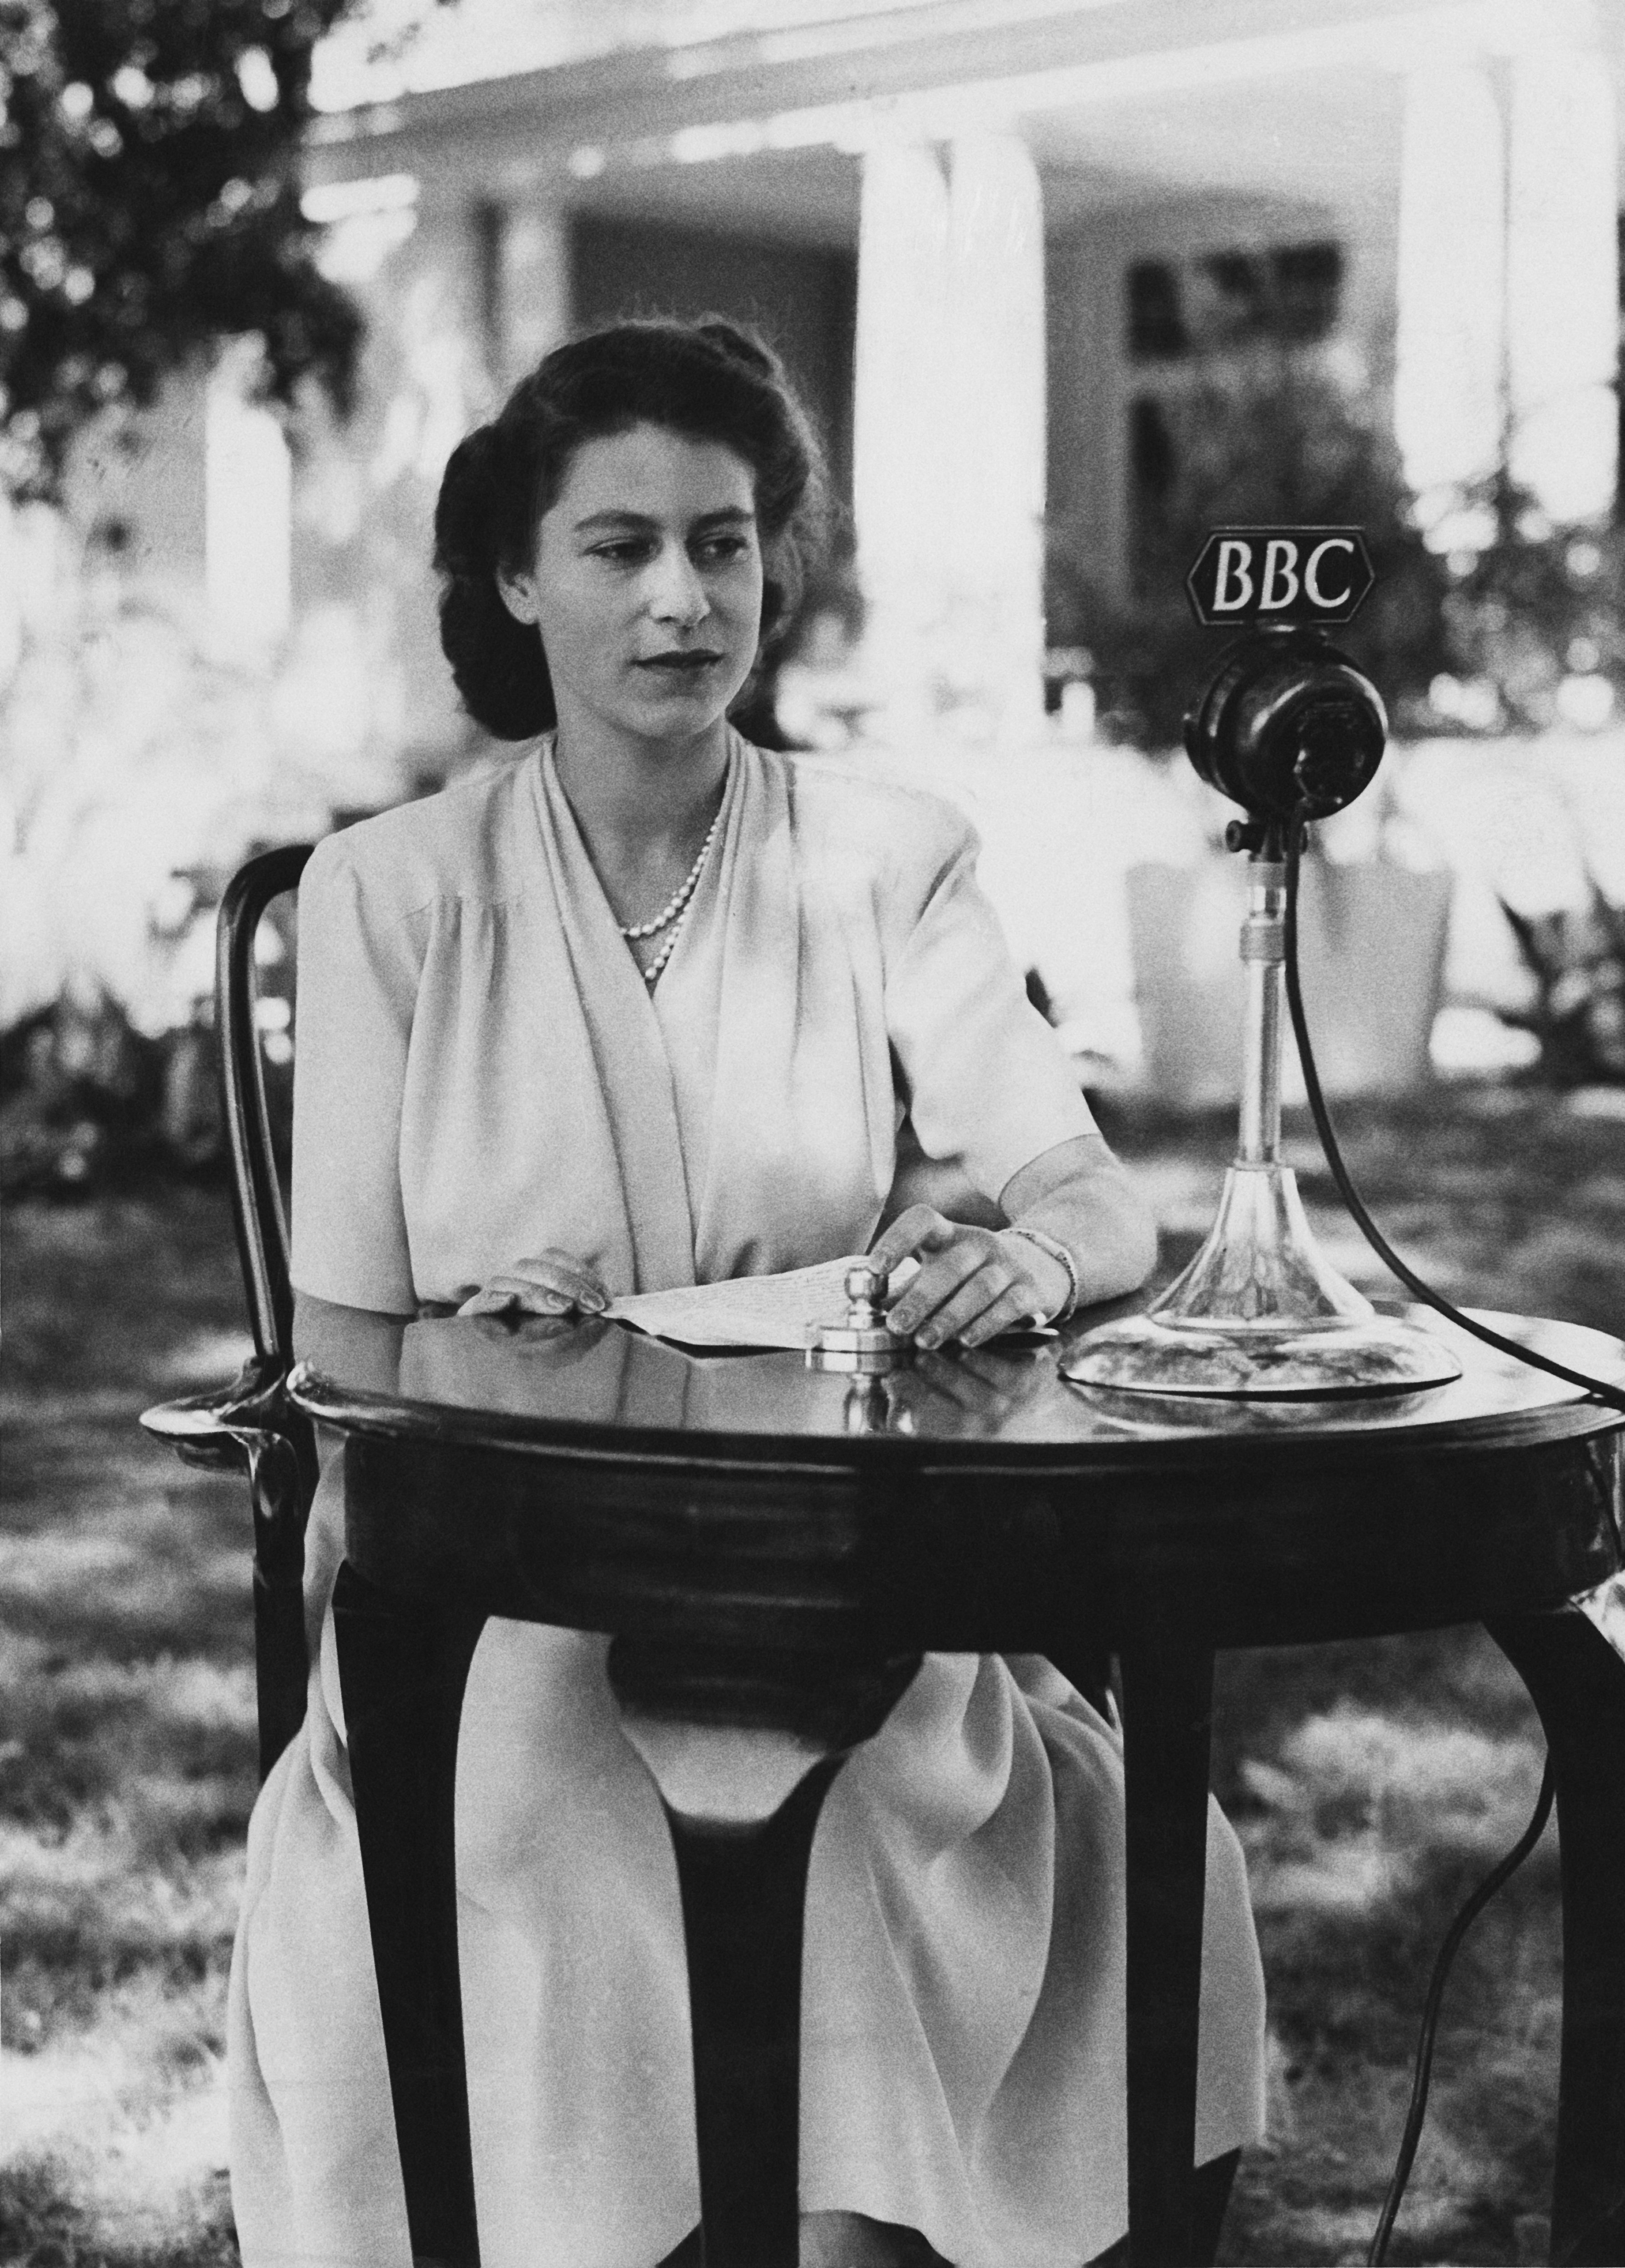 Princess Elizabeth makes a broadcast from the gardens of Government House in Cape Town, South Africa, on the occasion of her 21st birthday, 21st April 1947 | Source: Getty Images